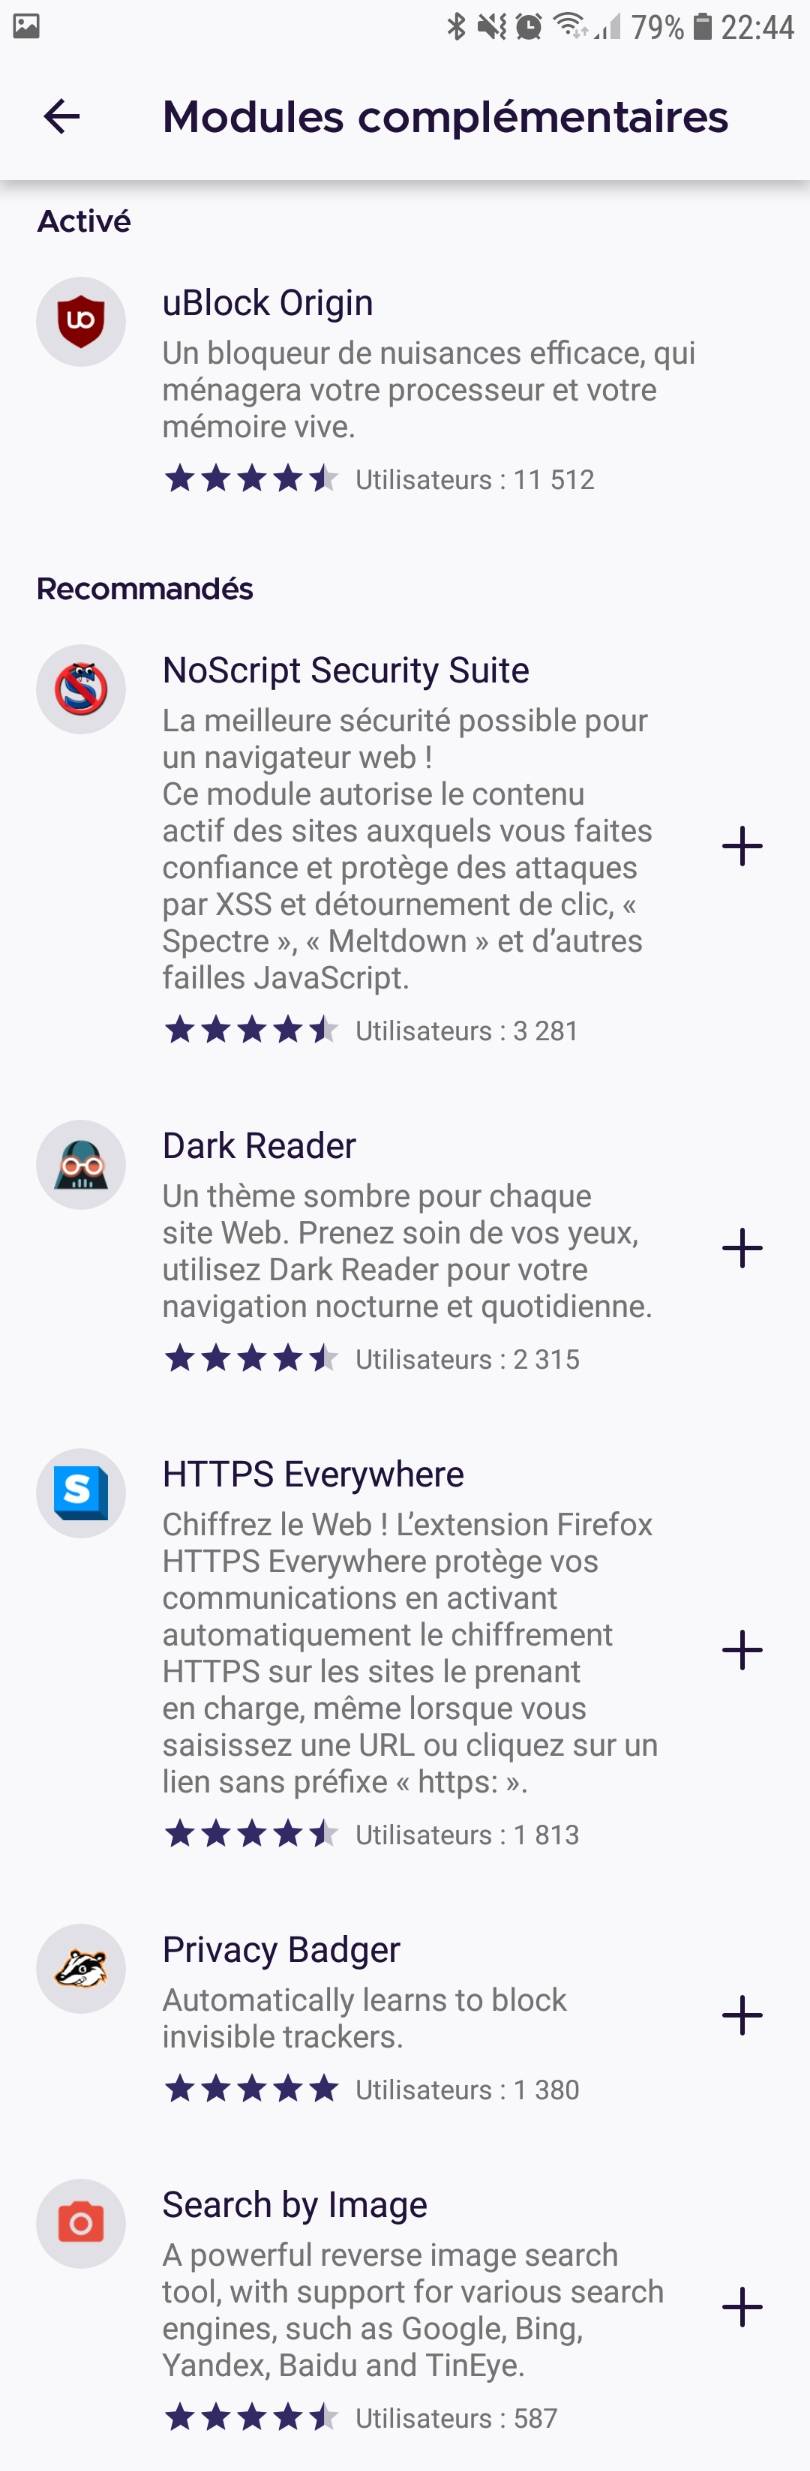 Firefox Preview Nightly 5.0 : extensions recommandées incluses